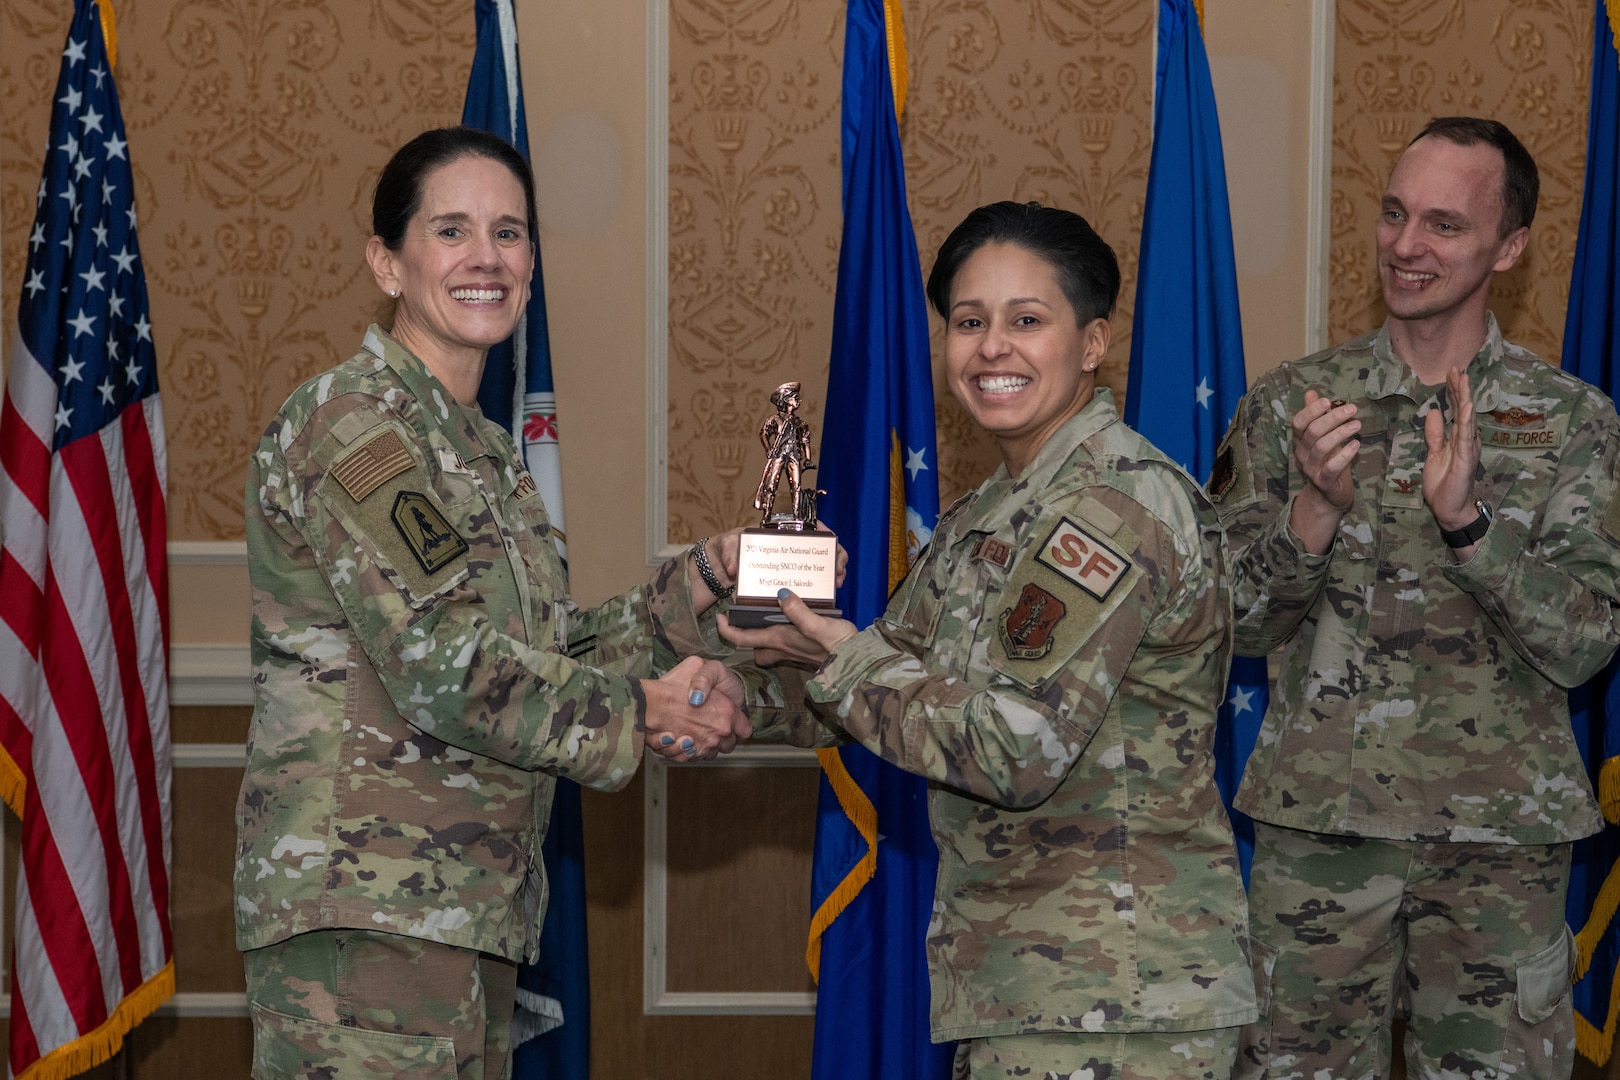 A general and Airman holding a trophy